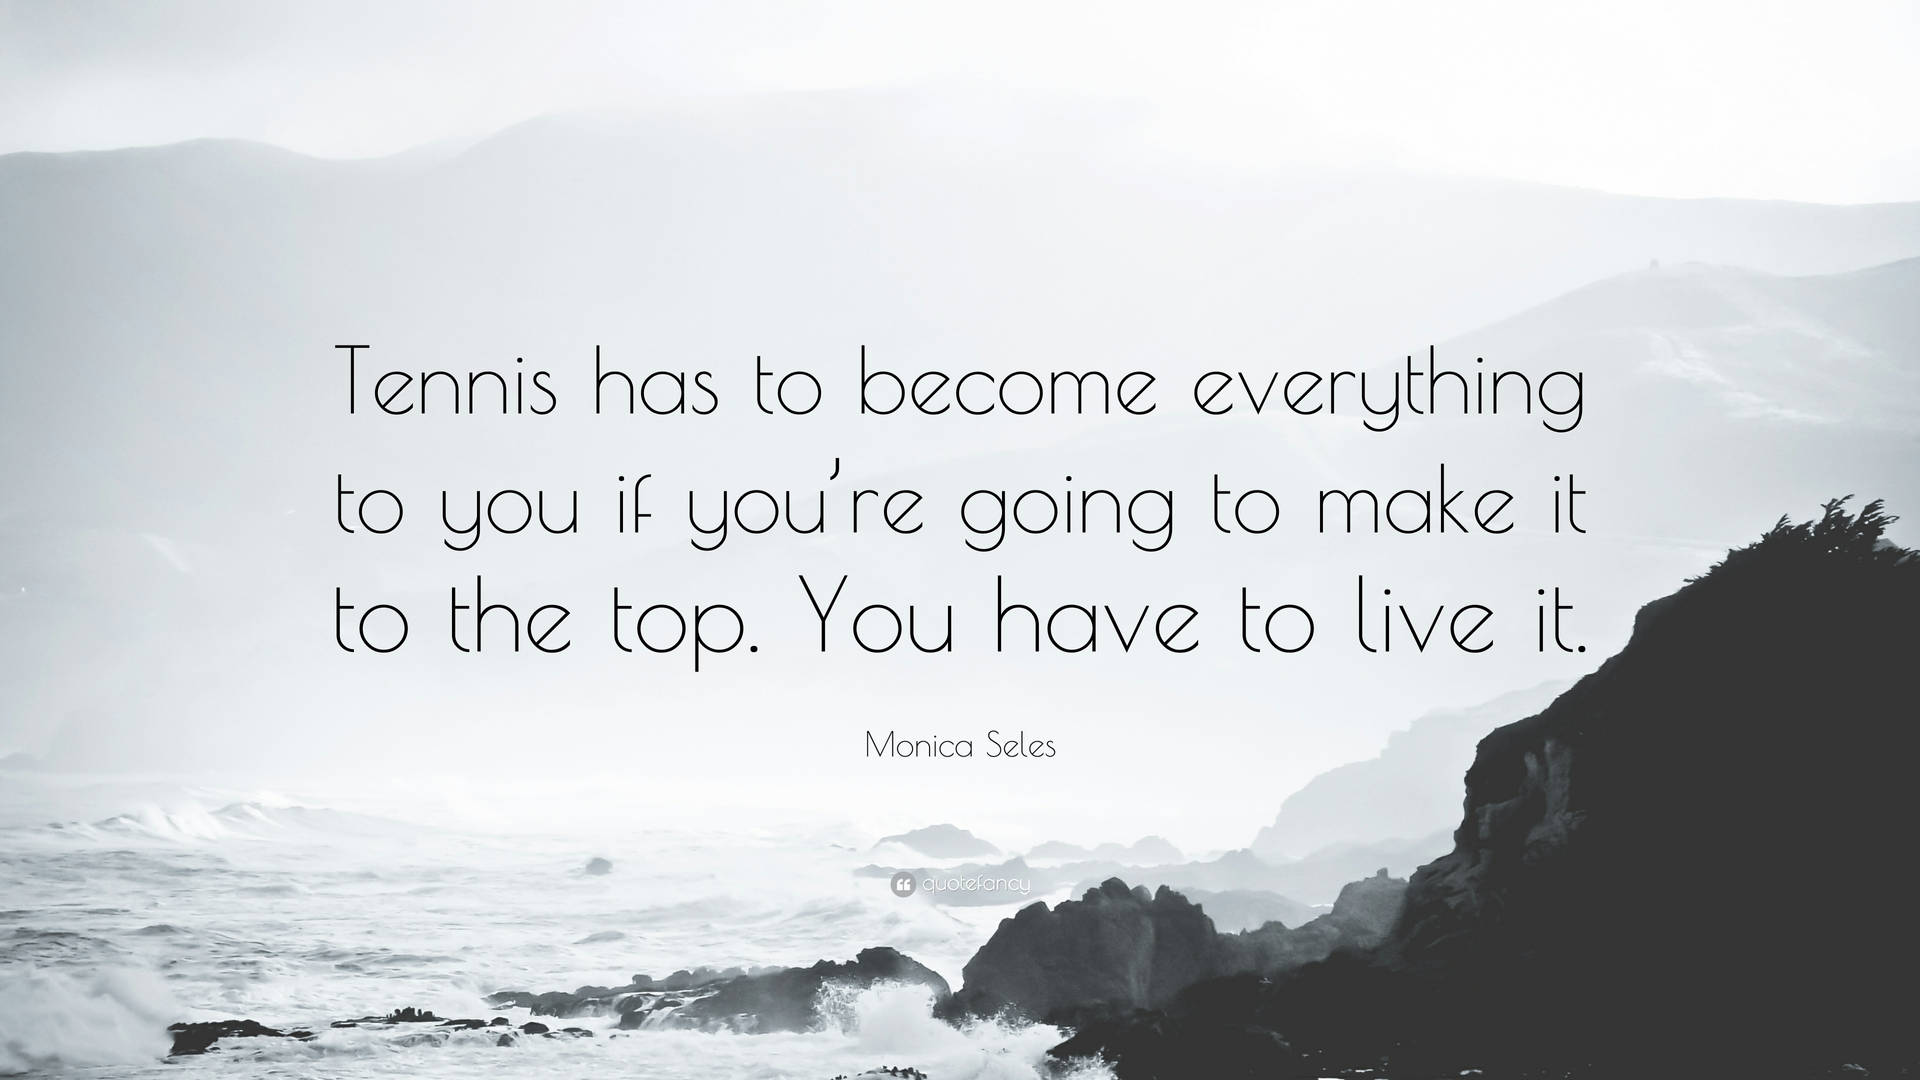 Monica Seles Quote About Tennis Wallpaper